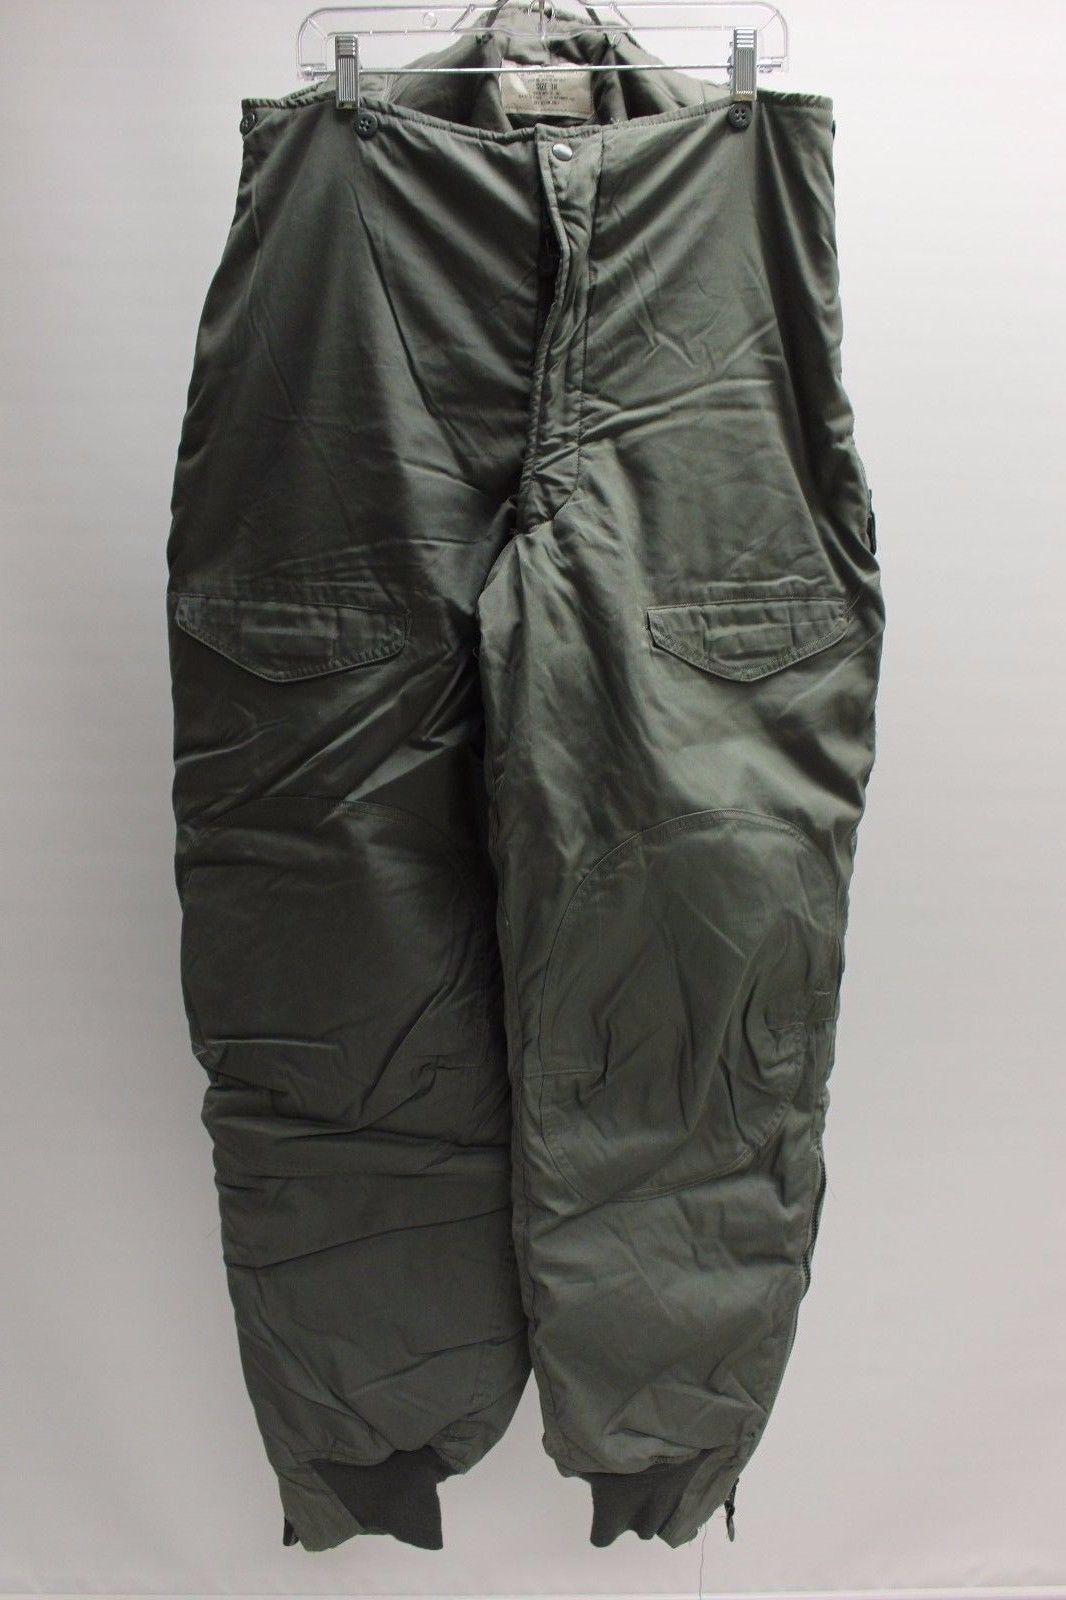 Military Field Pant Liner for Cold Weather Trousers - Quilted - Olive Drab  Green - Genuine Army Issue by U.S. Government Contractor : Amazon.in:  Clothing & Accessories